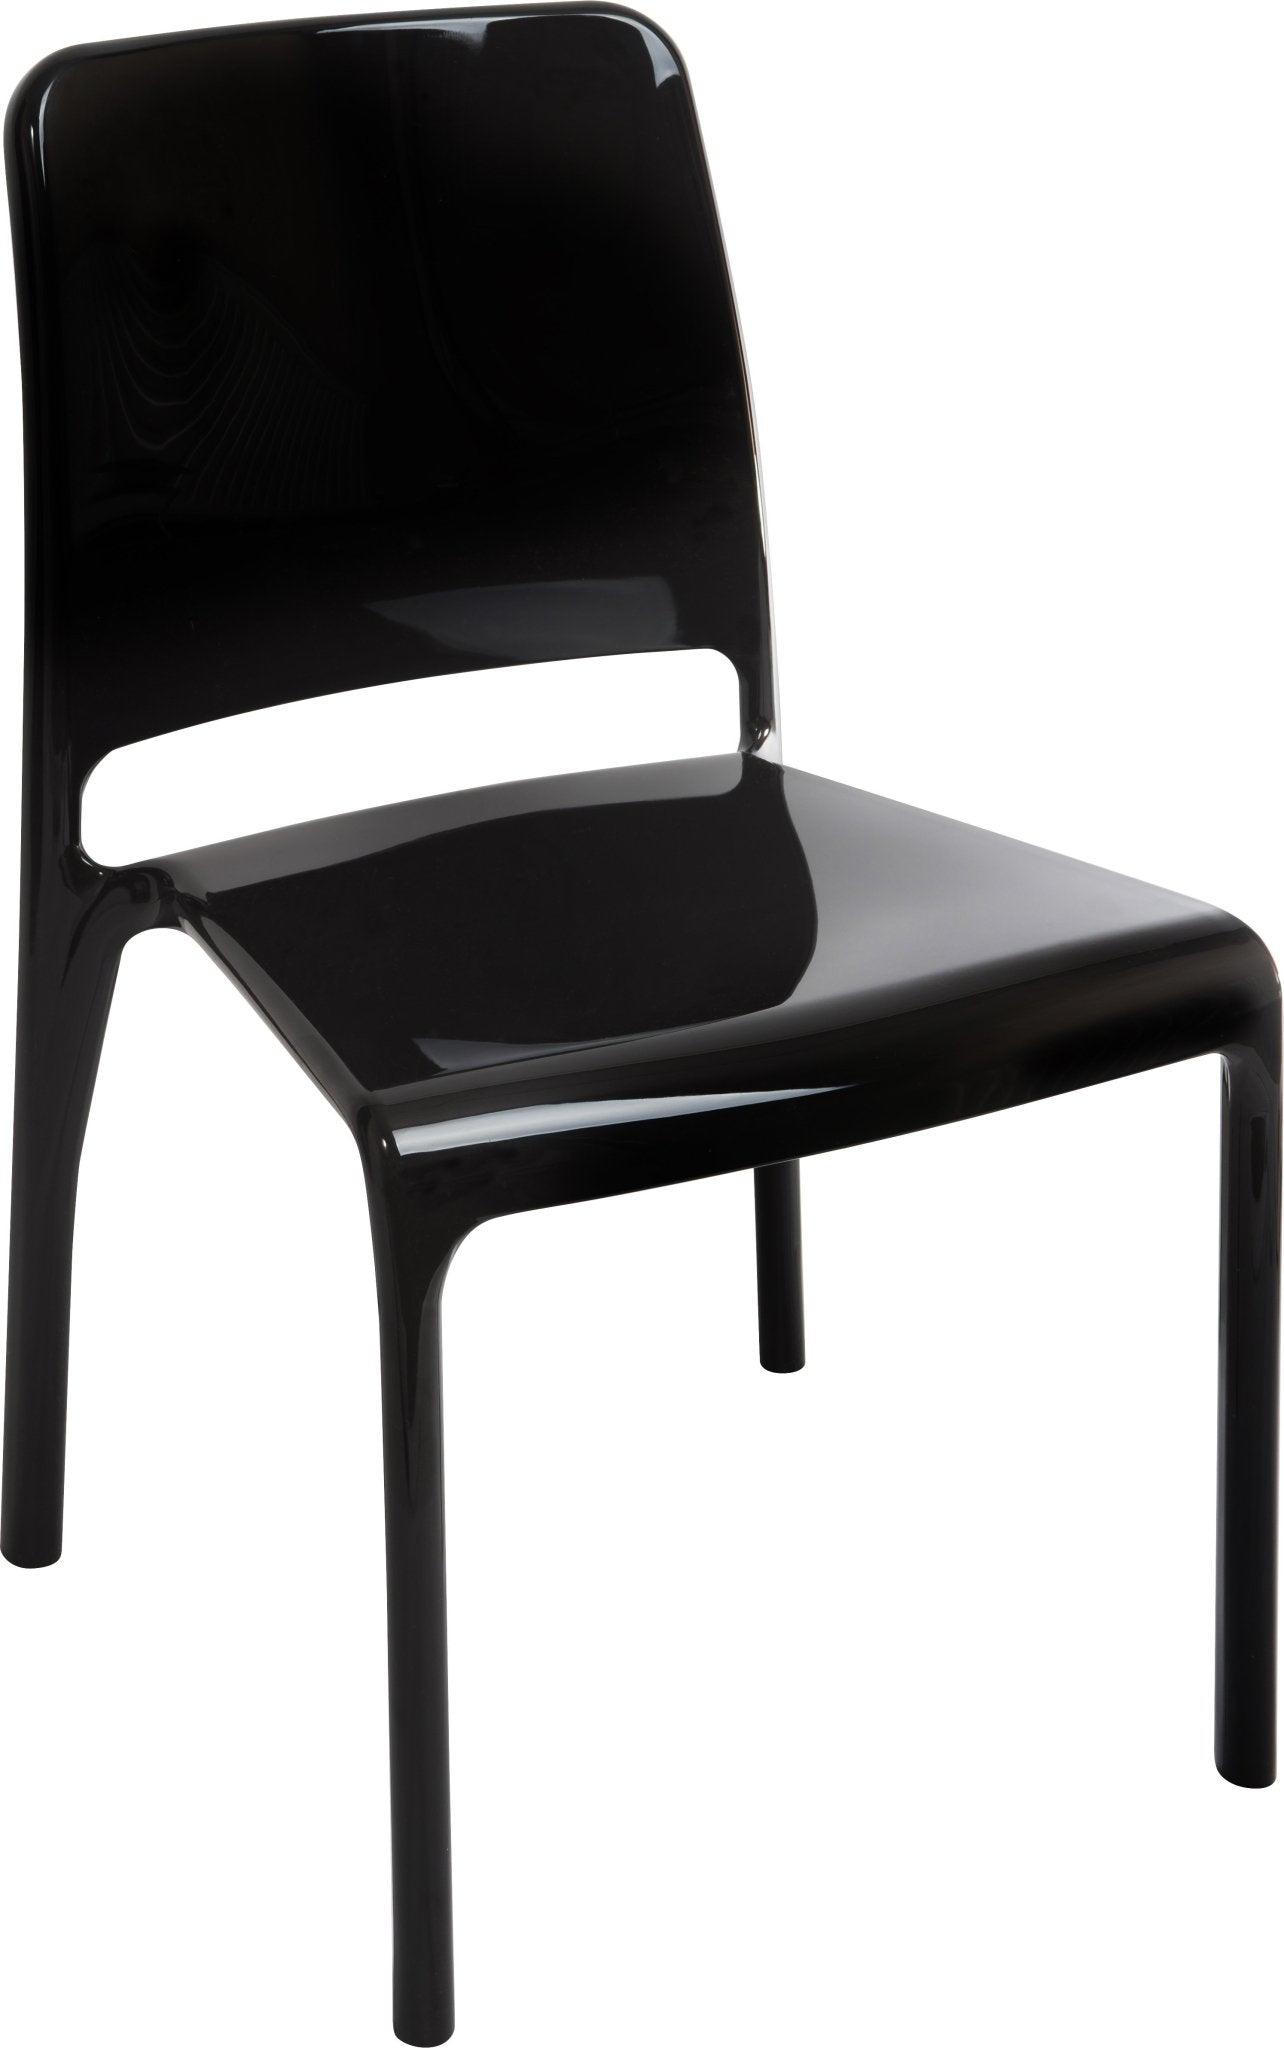 Clarity dining room chair (black) pack of 4 - image 1